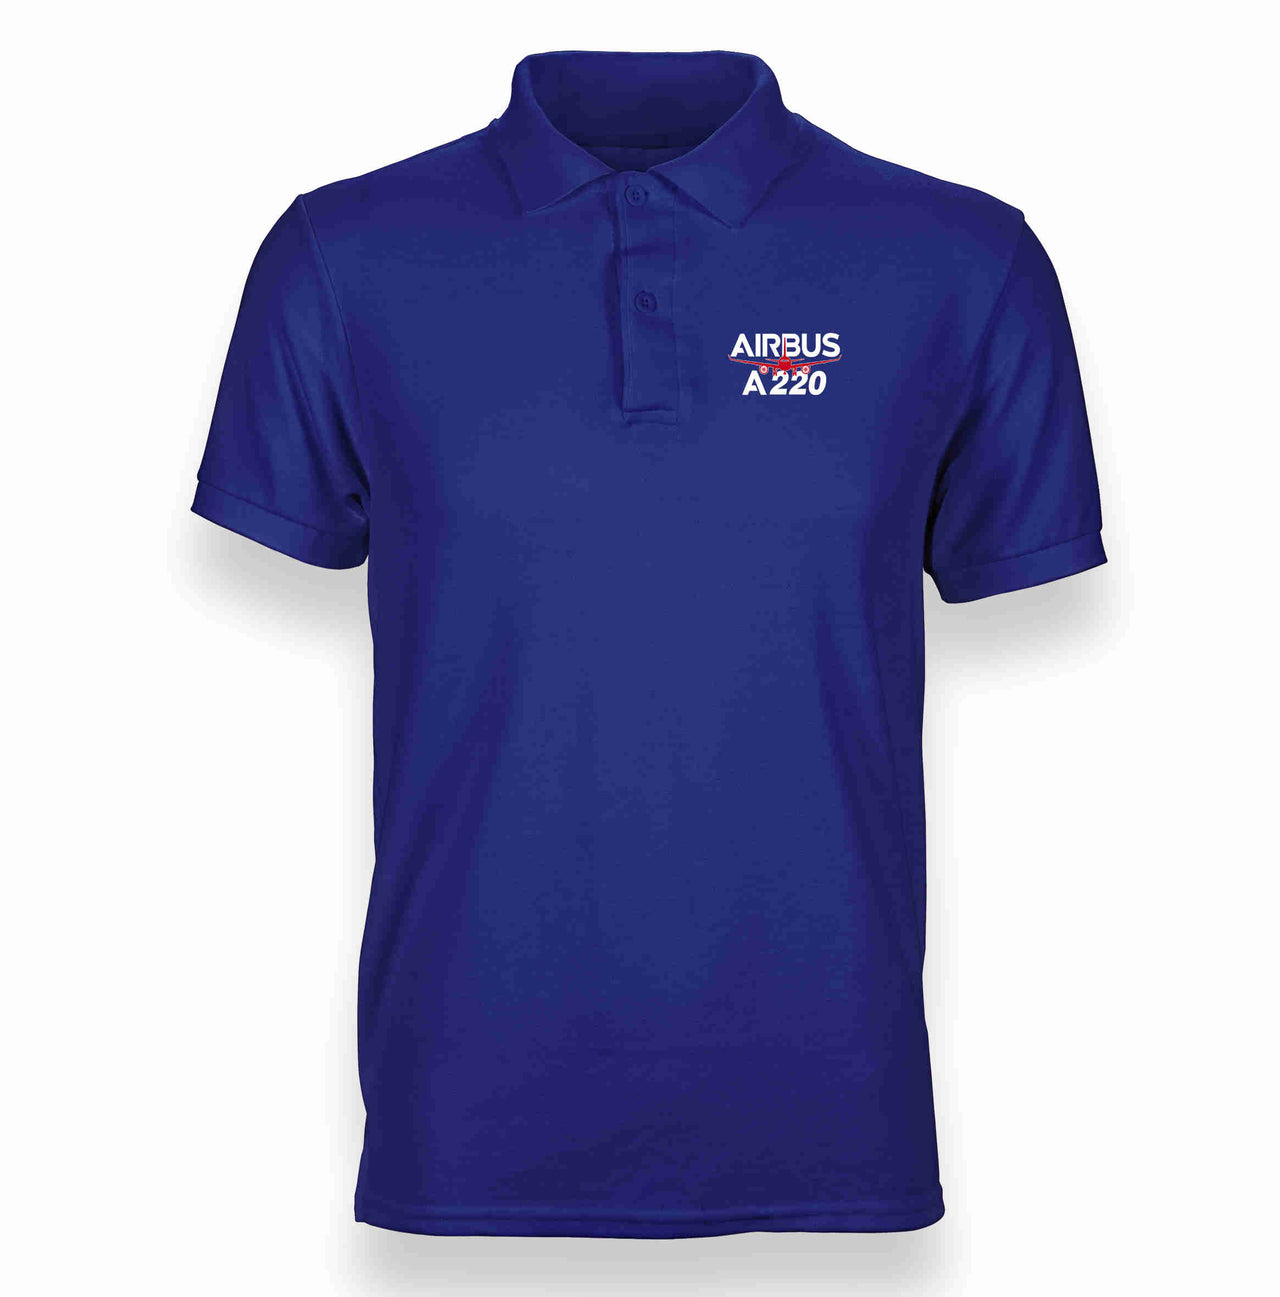 Amazing Airbus A220 Designed "WOMEN" Polo T-Shirts